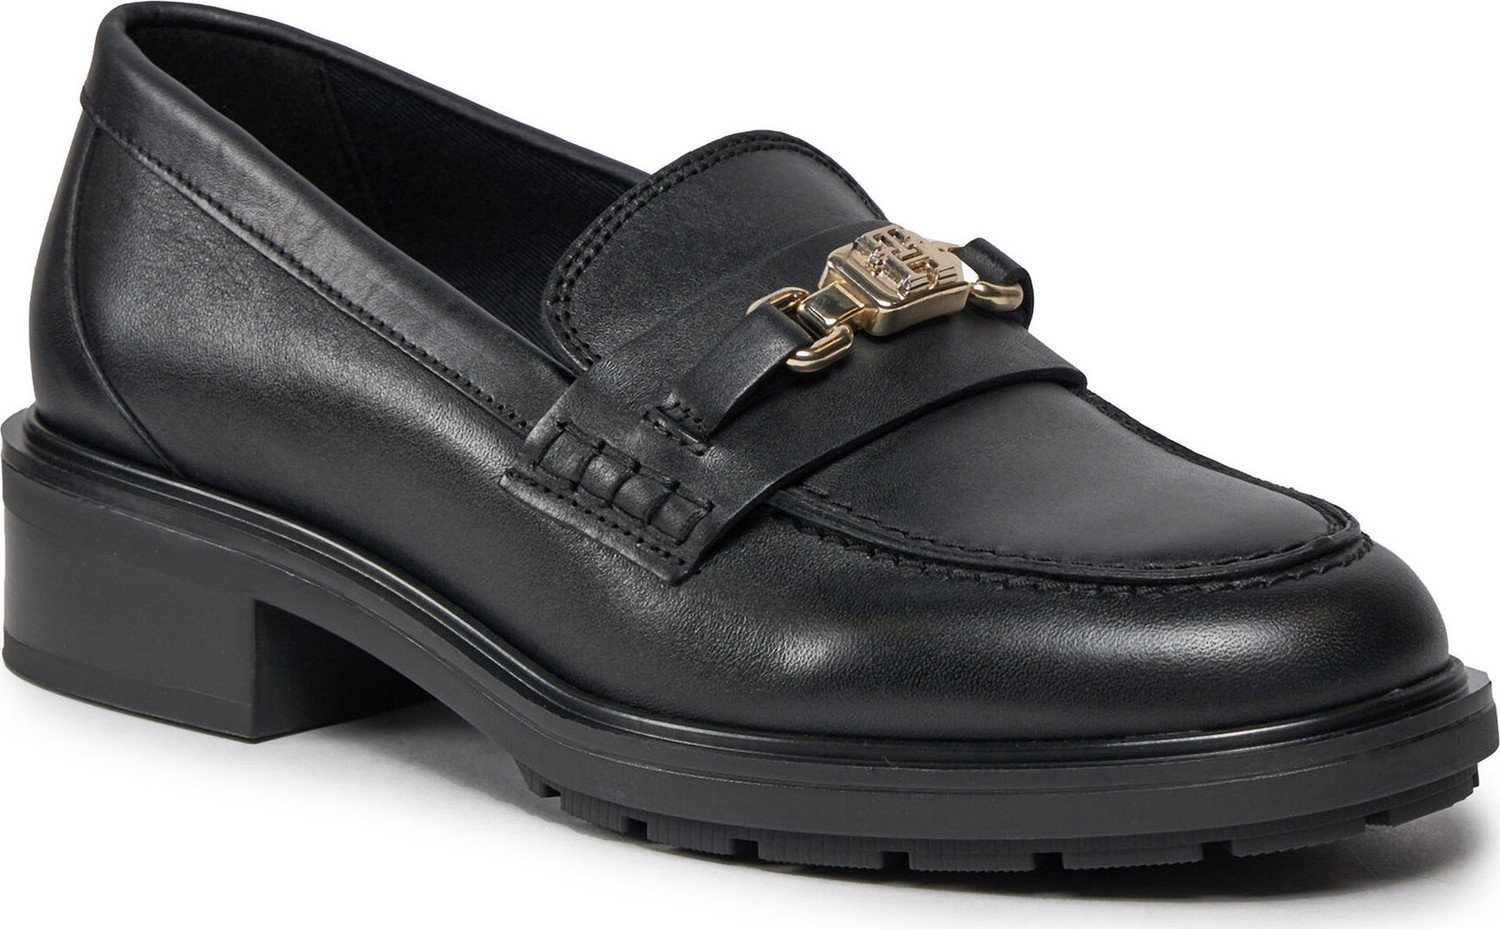 Loafersy Tommy Hilfiger Th Hardware Loafer FW0FW07765 Black BDS